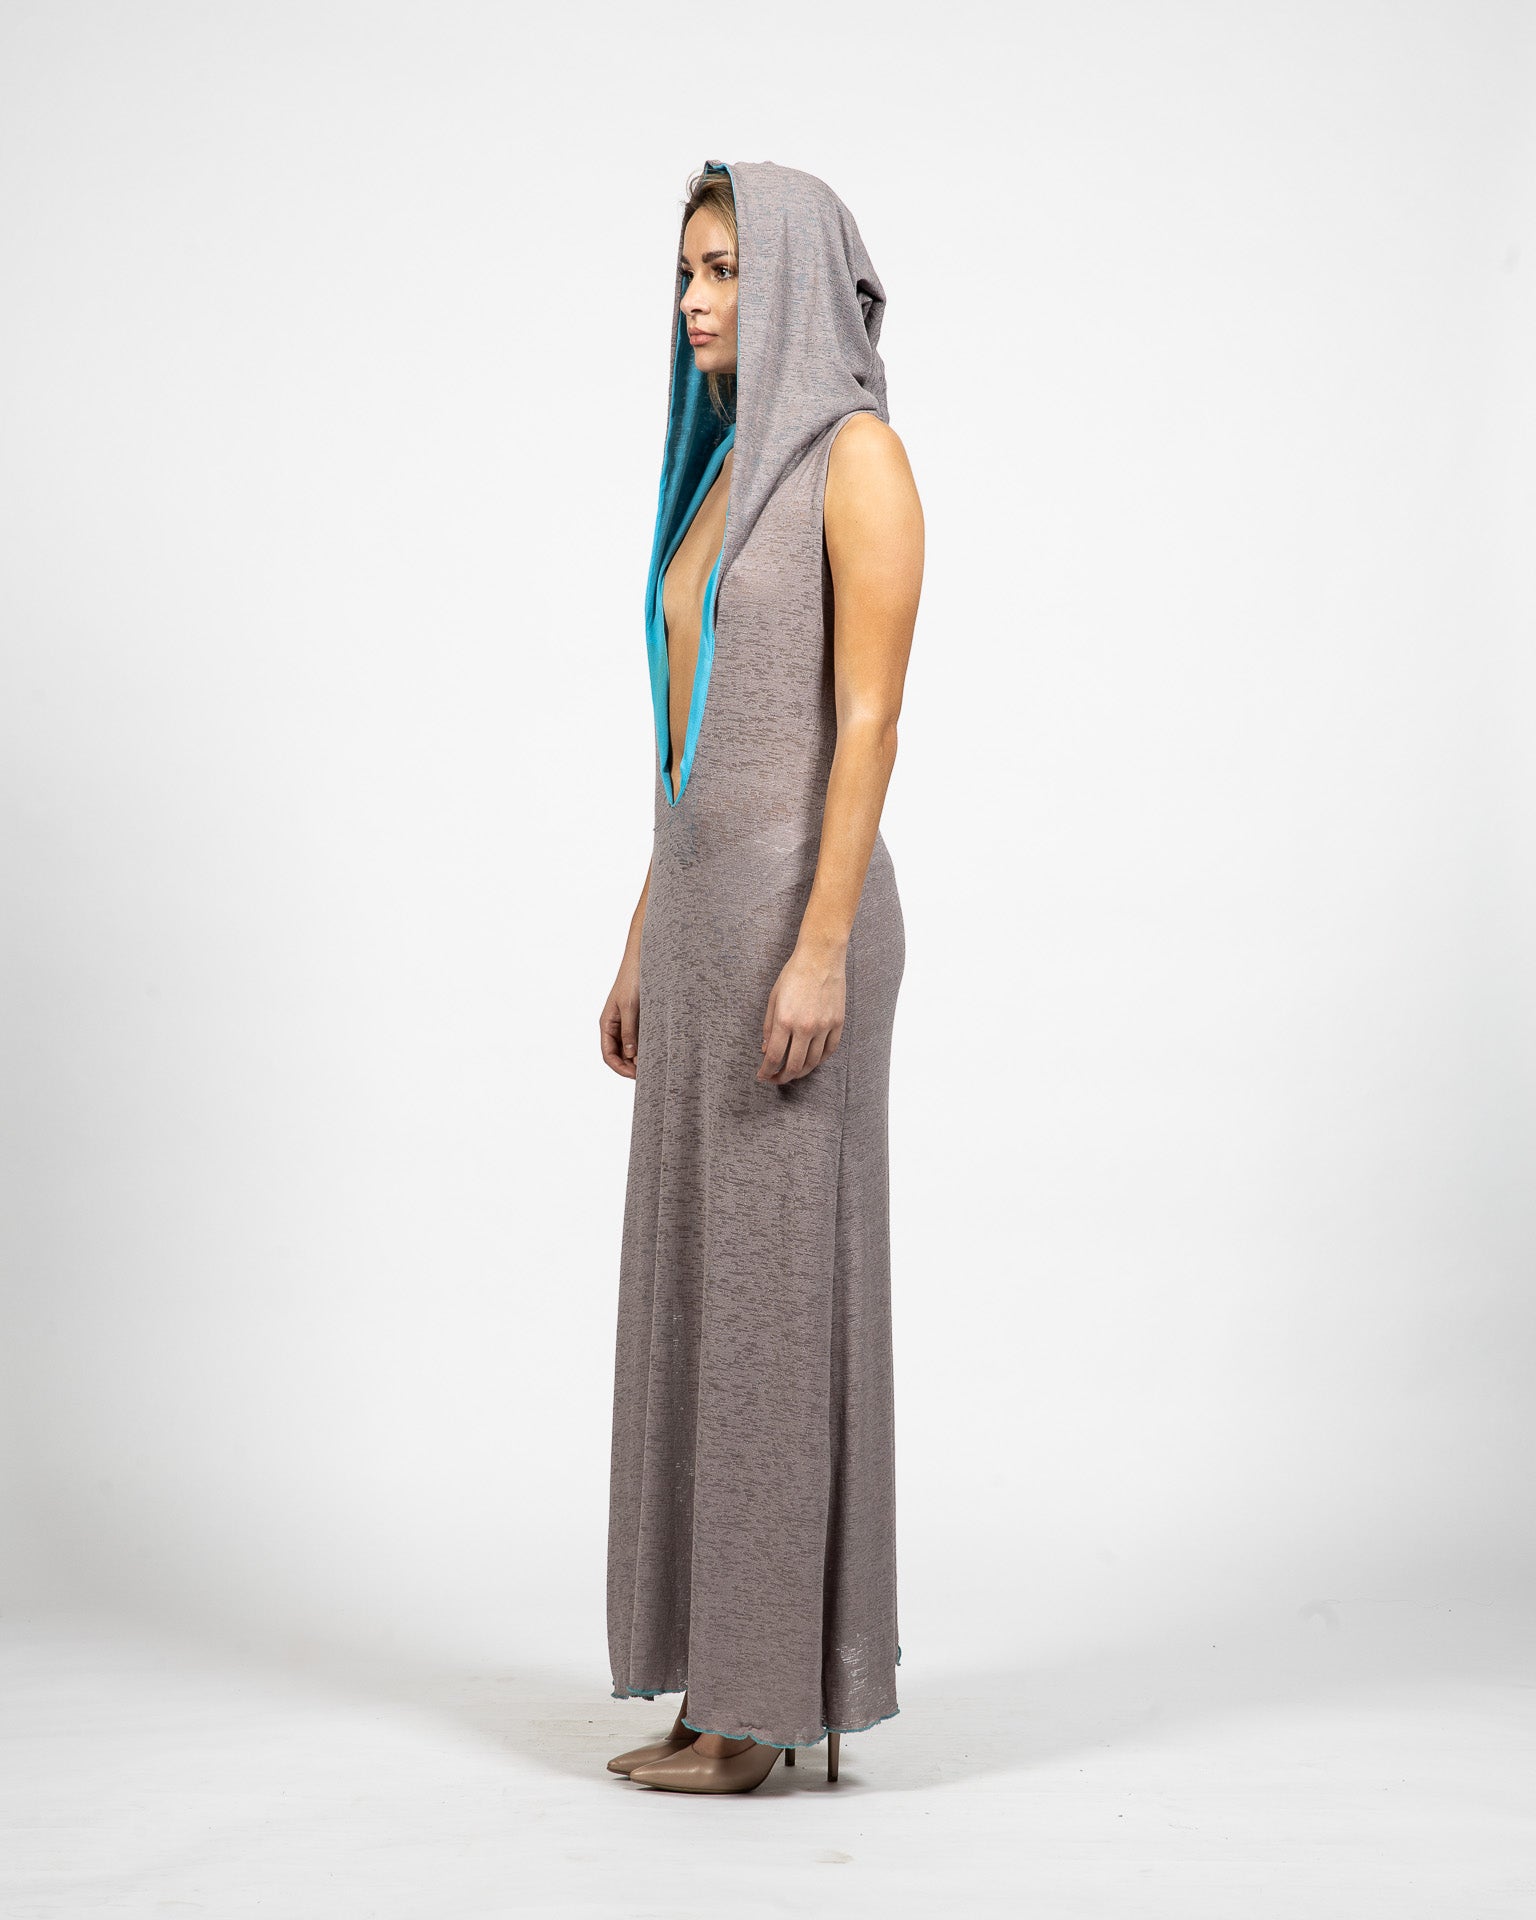 Long Grey Hooded Dress With Blue Accents - Side View - Samuel Vartan